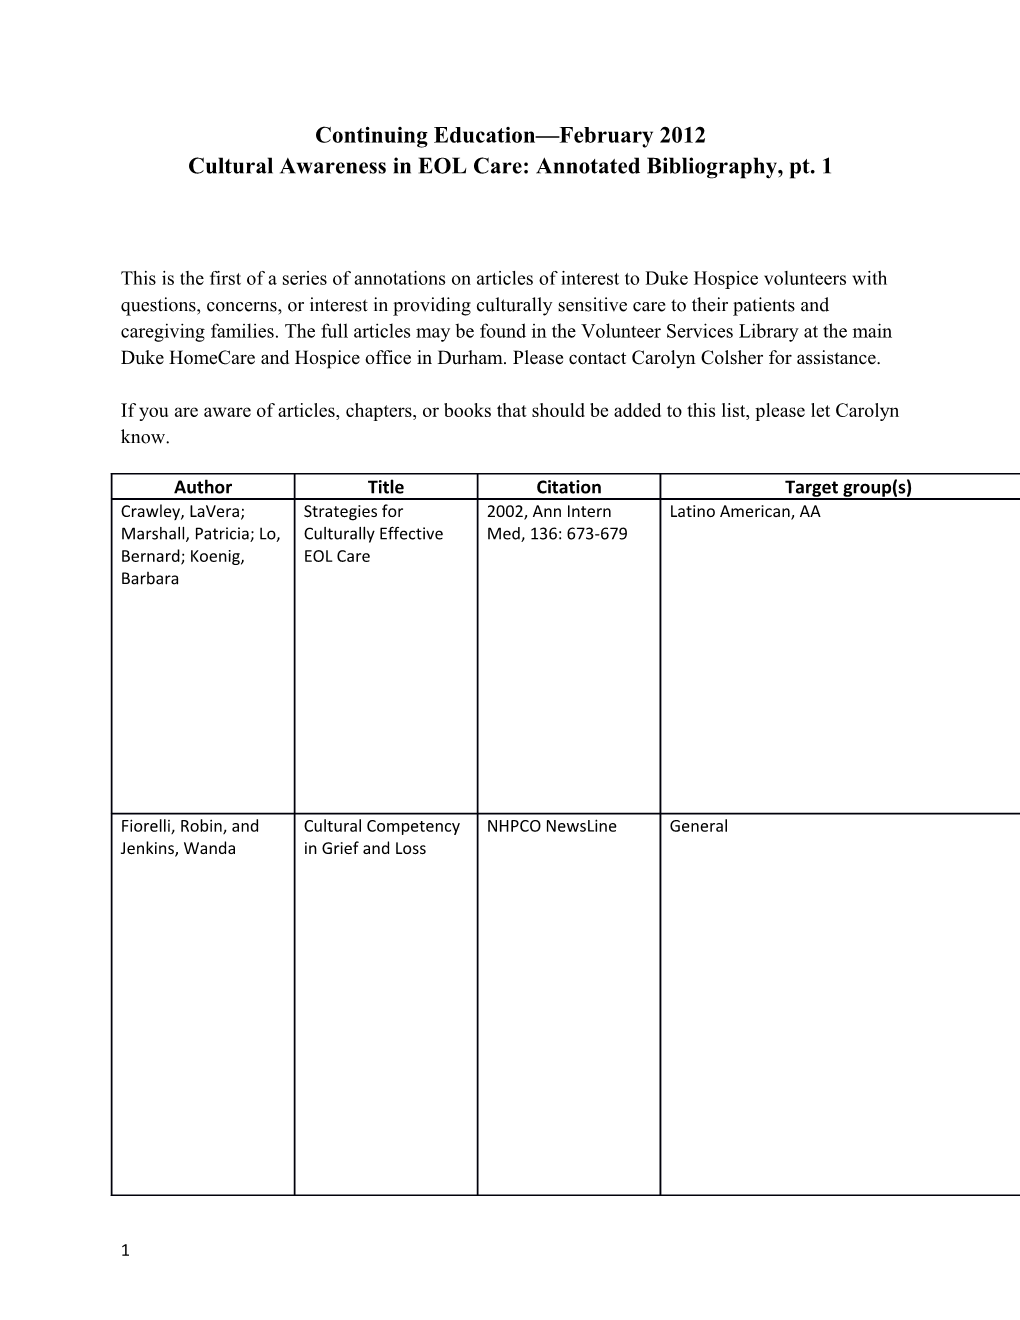 Cultural Awareness in EOL Care: Annotated Bibliography, Pt. 1